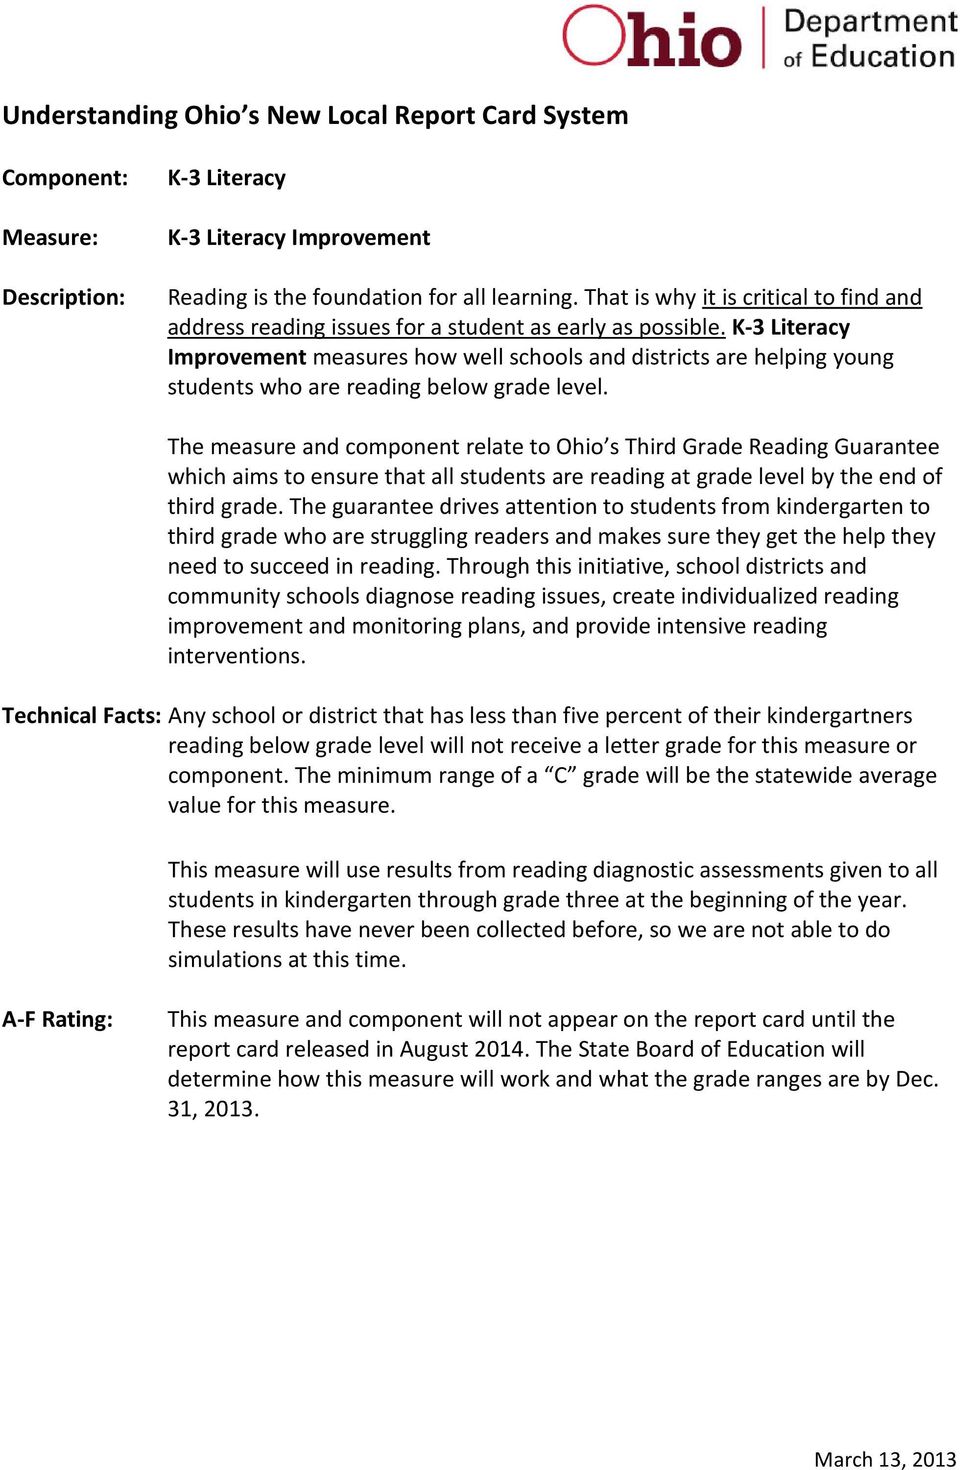 The measure and component relate to Ohio s Third Grade Reading Guarantee which aims to ensure that all students are reading at grade level by the end of third grade.